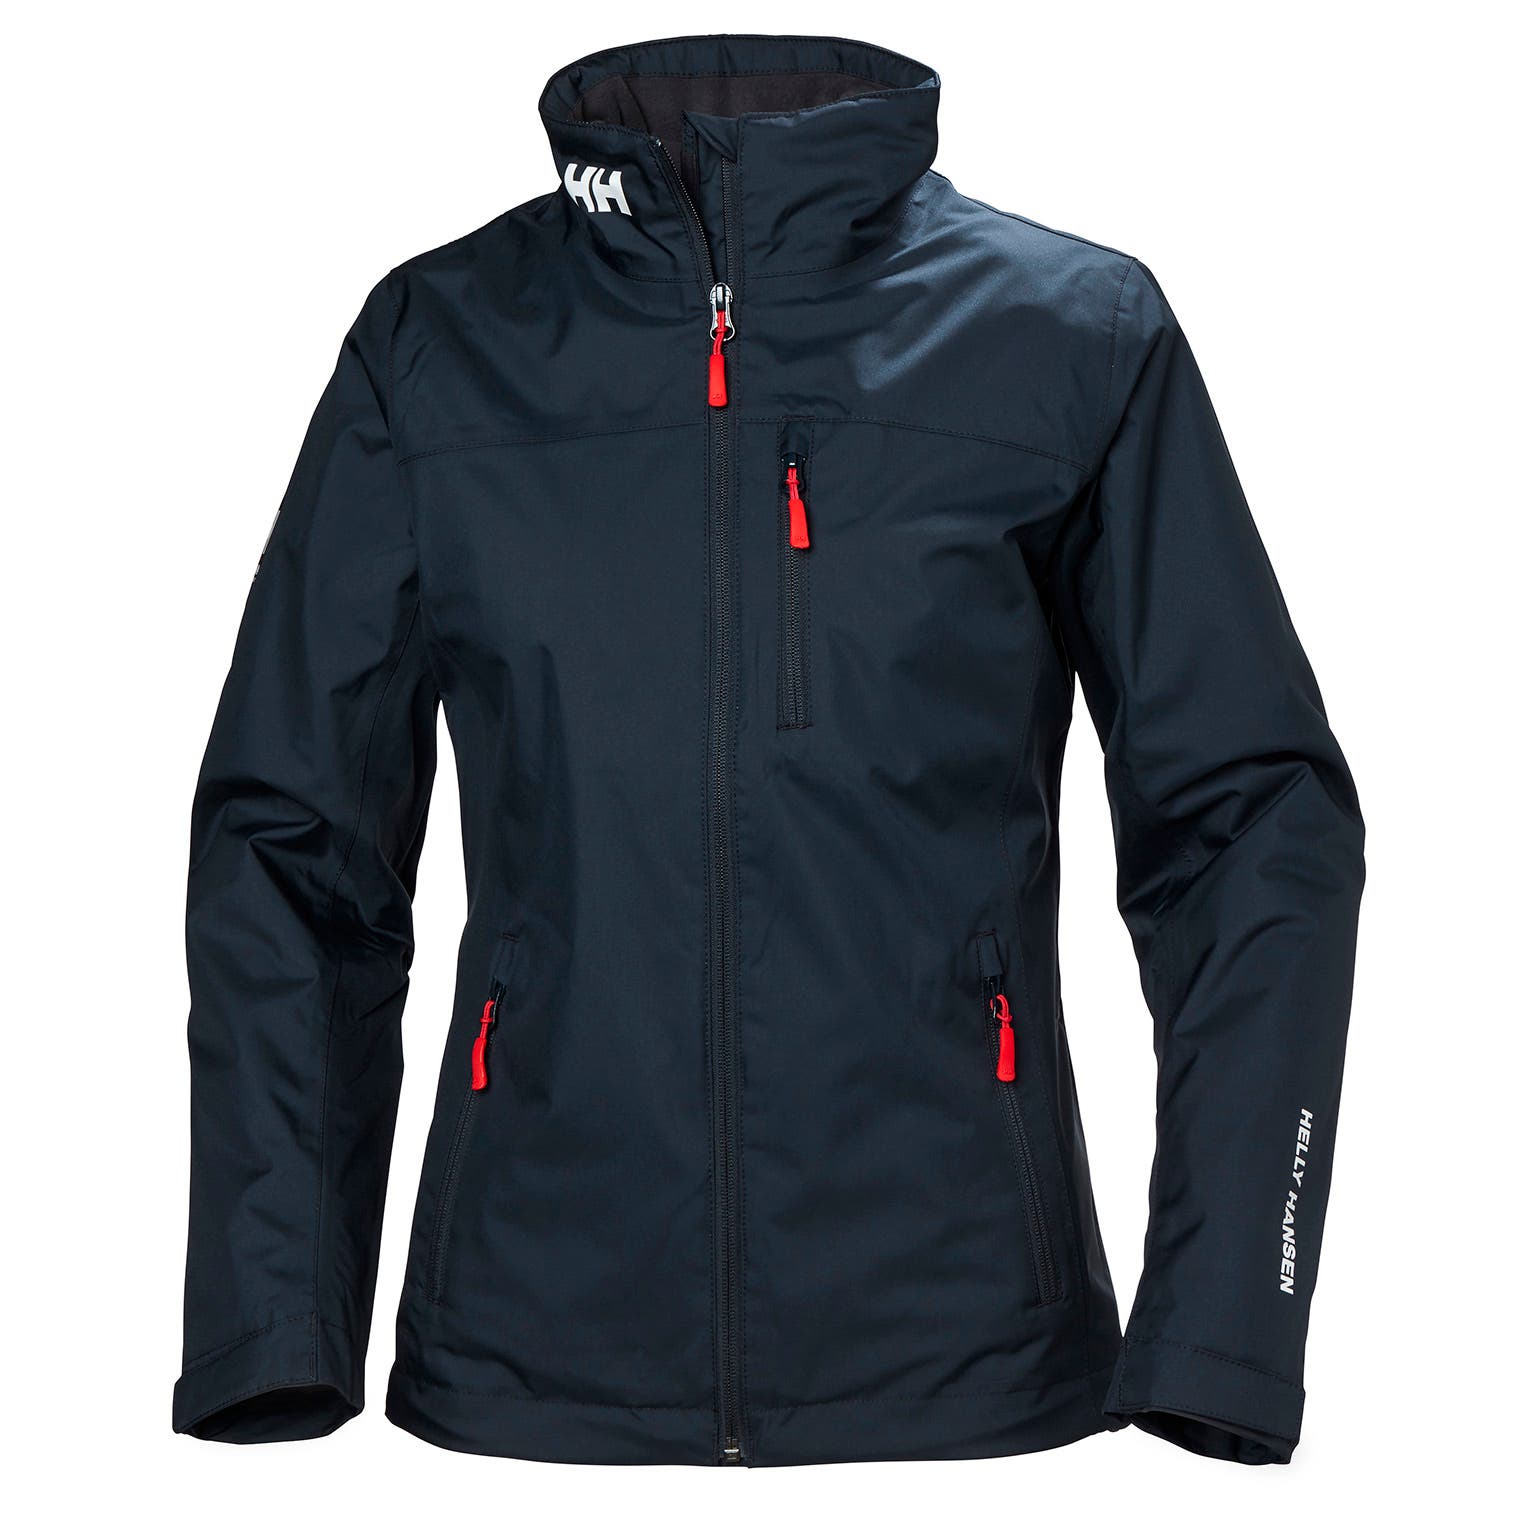 Helly Hansen Women's Crew Midlayer Jacket in Navy from the front